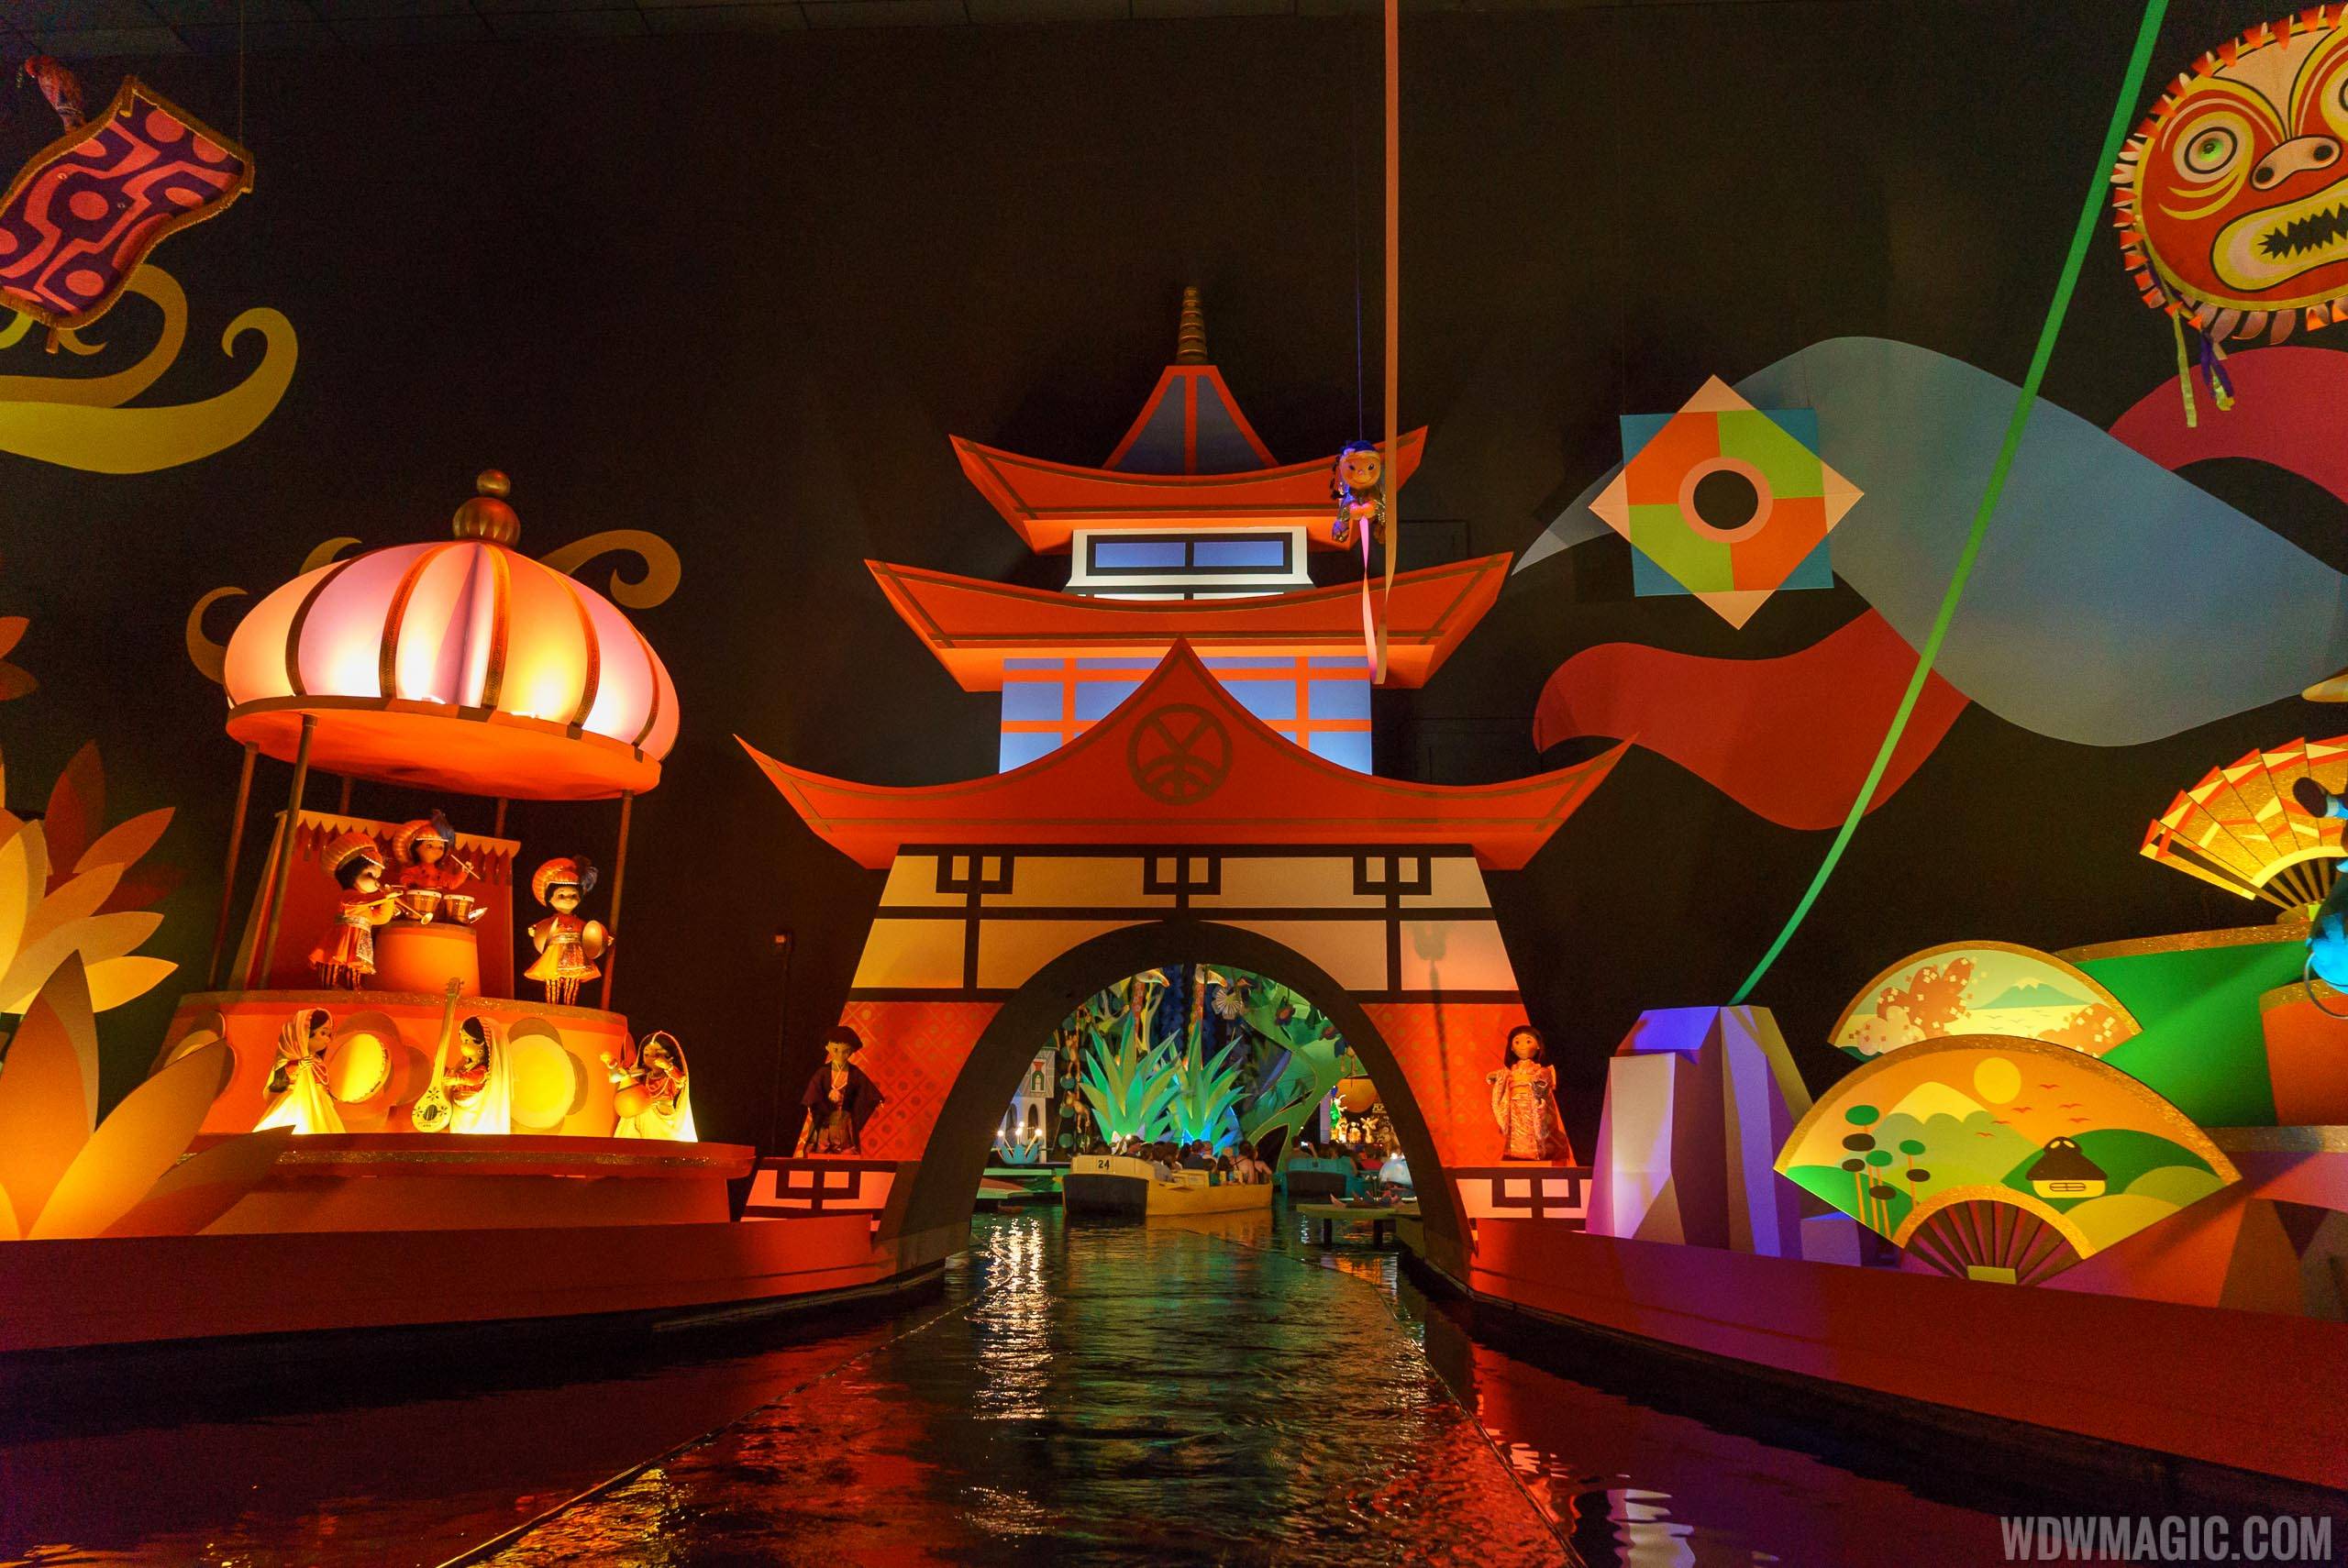 Small World reopens